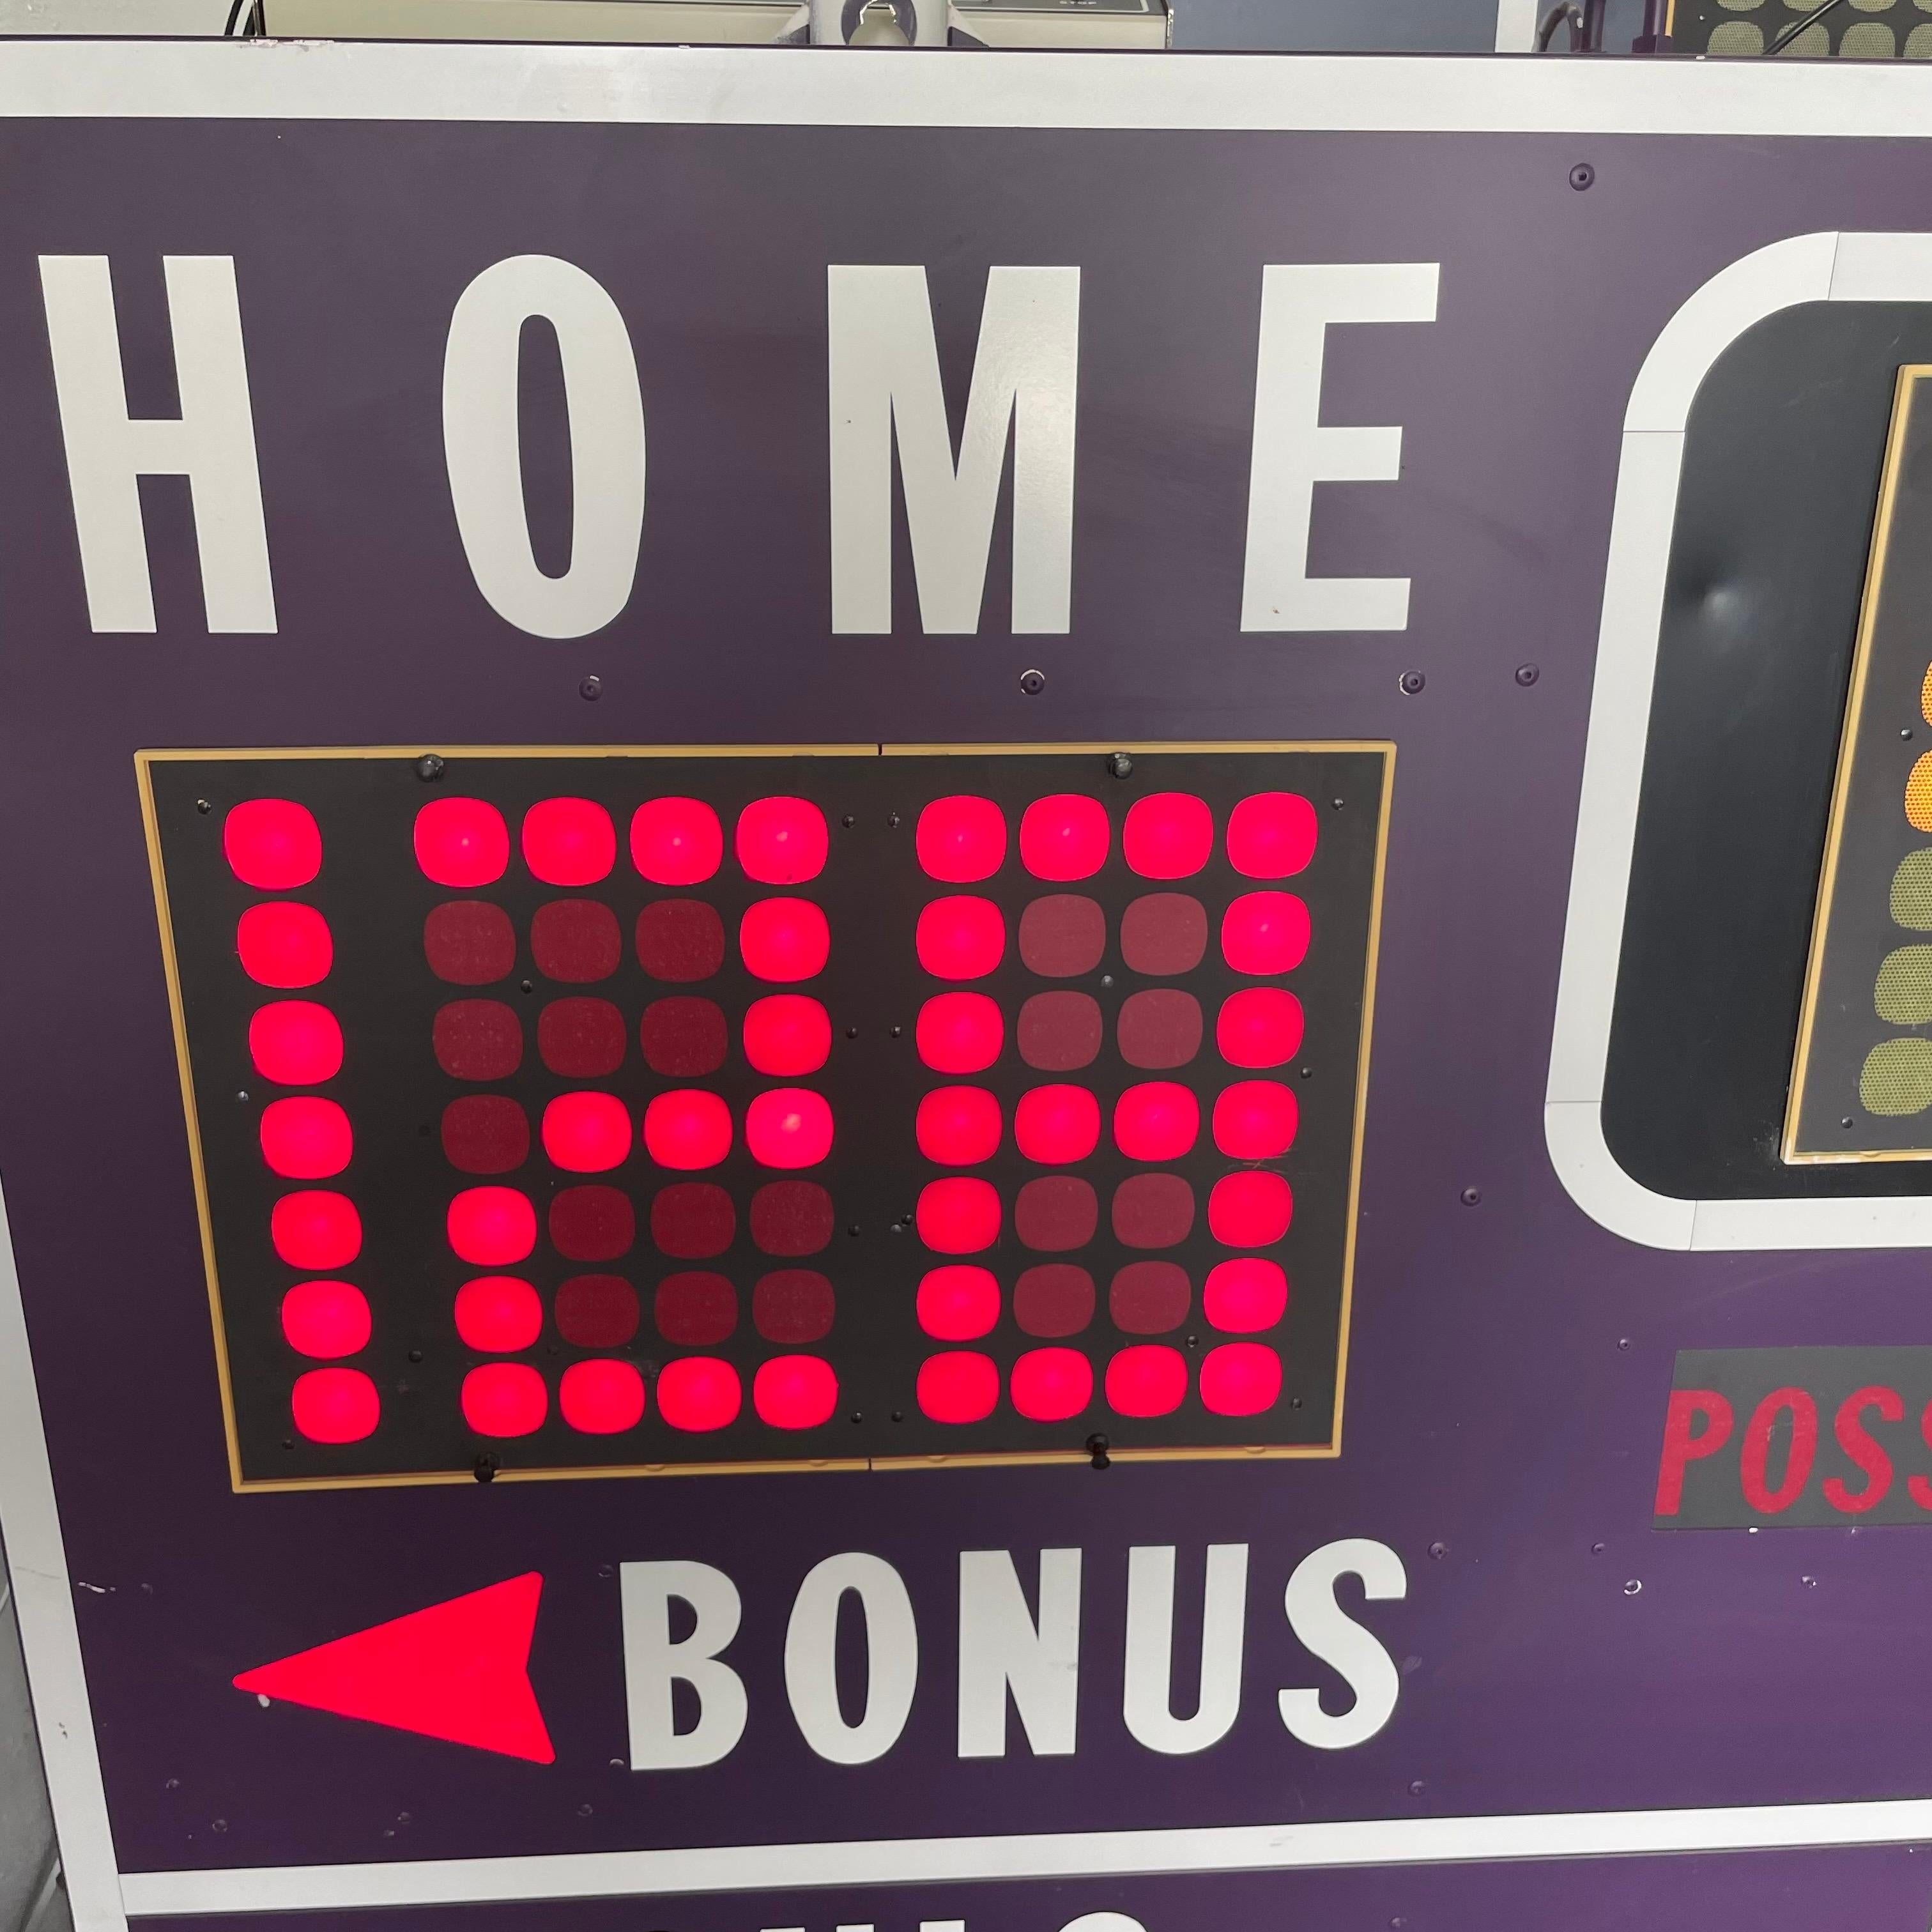 9 foot long basketball scoreboard by Fair Play. Made in the 1970s. Retired from a high school in Chicago. Dark purple frame. Comes with working controller. Scoreboard features a running clock, home and visitor score, period, bonus/possession, and